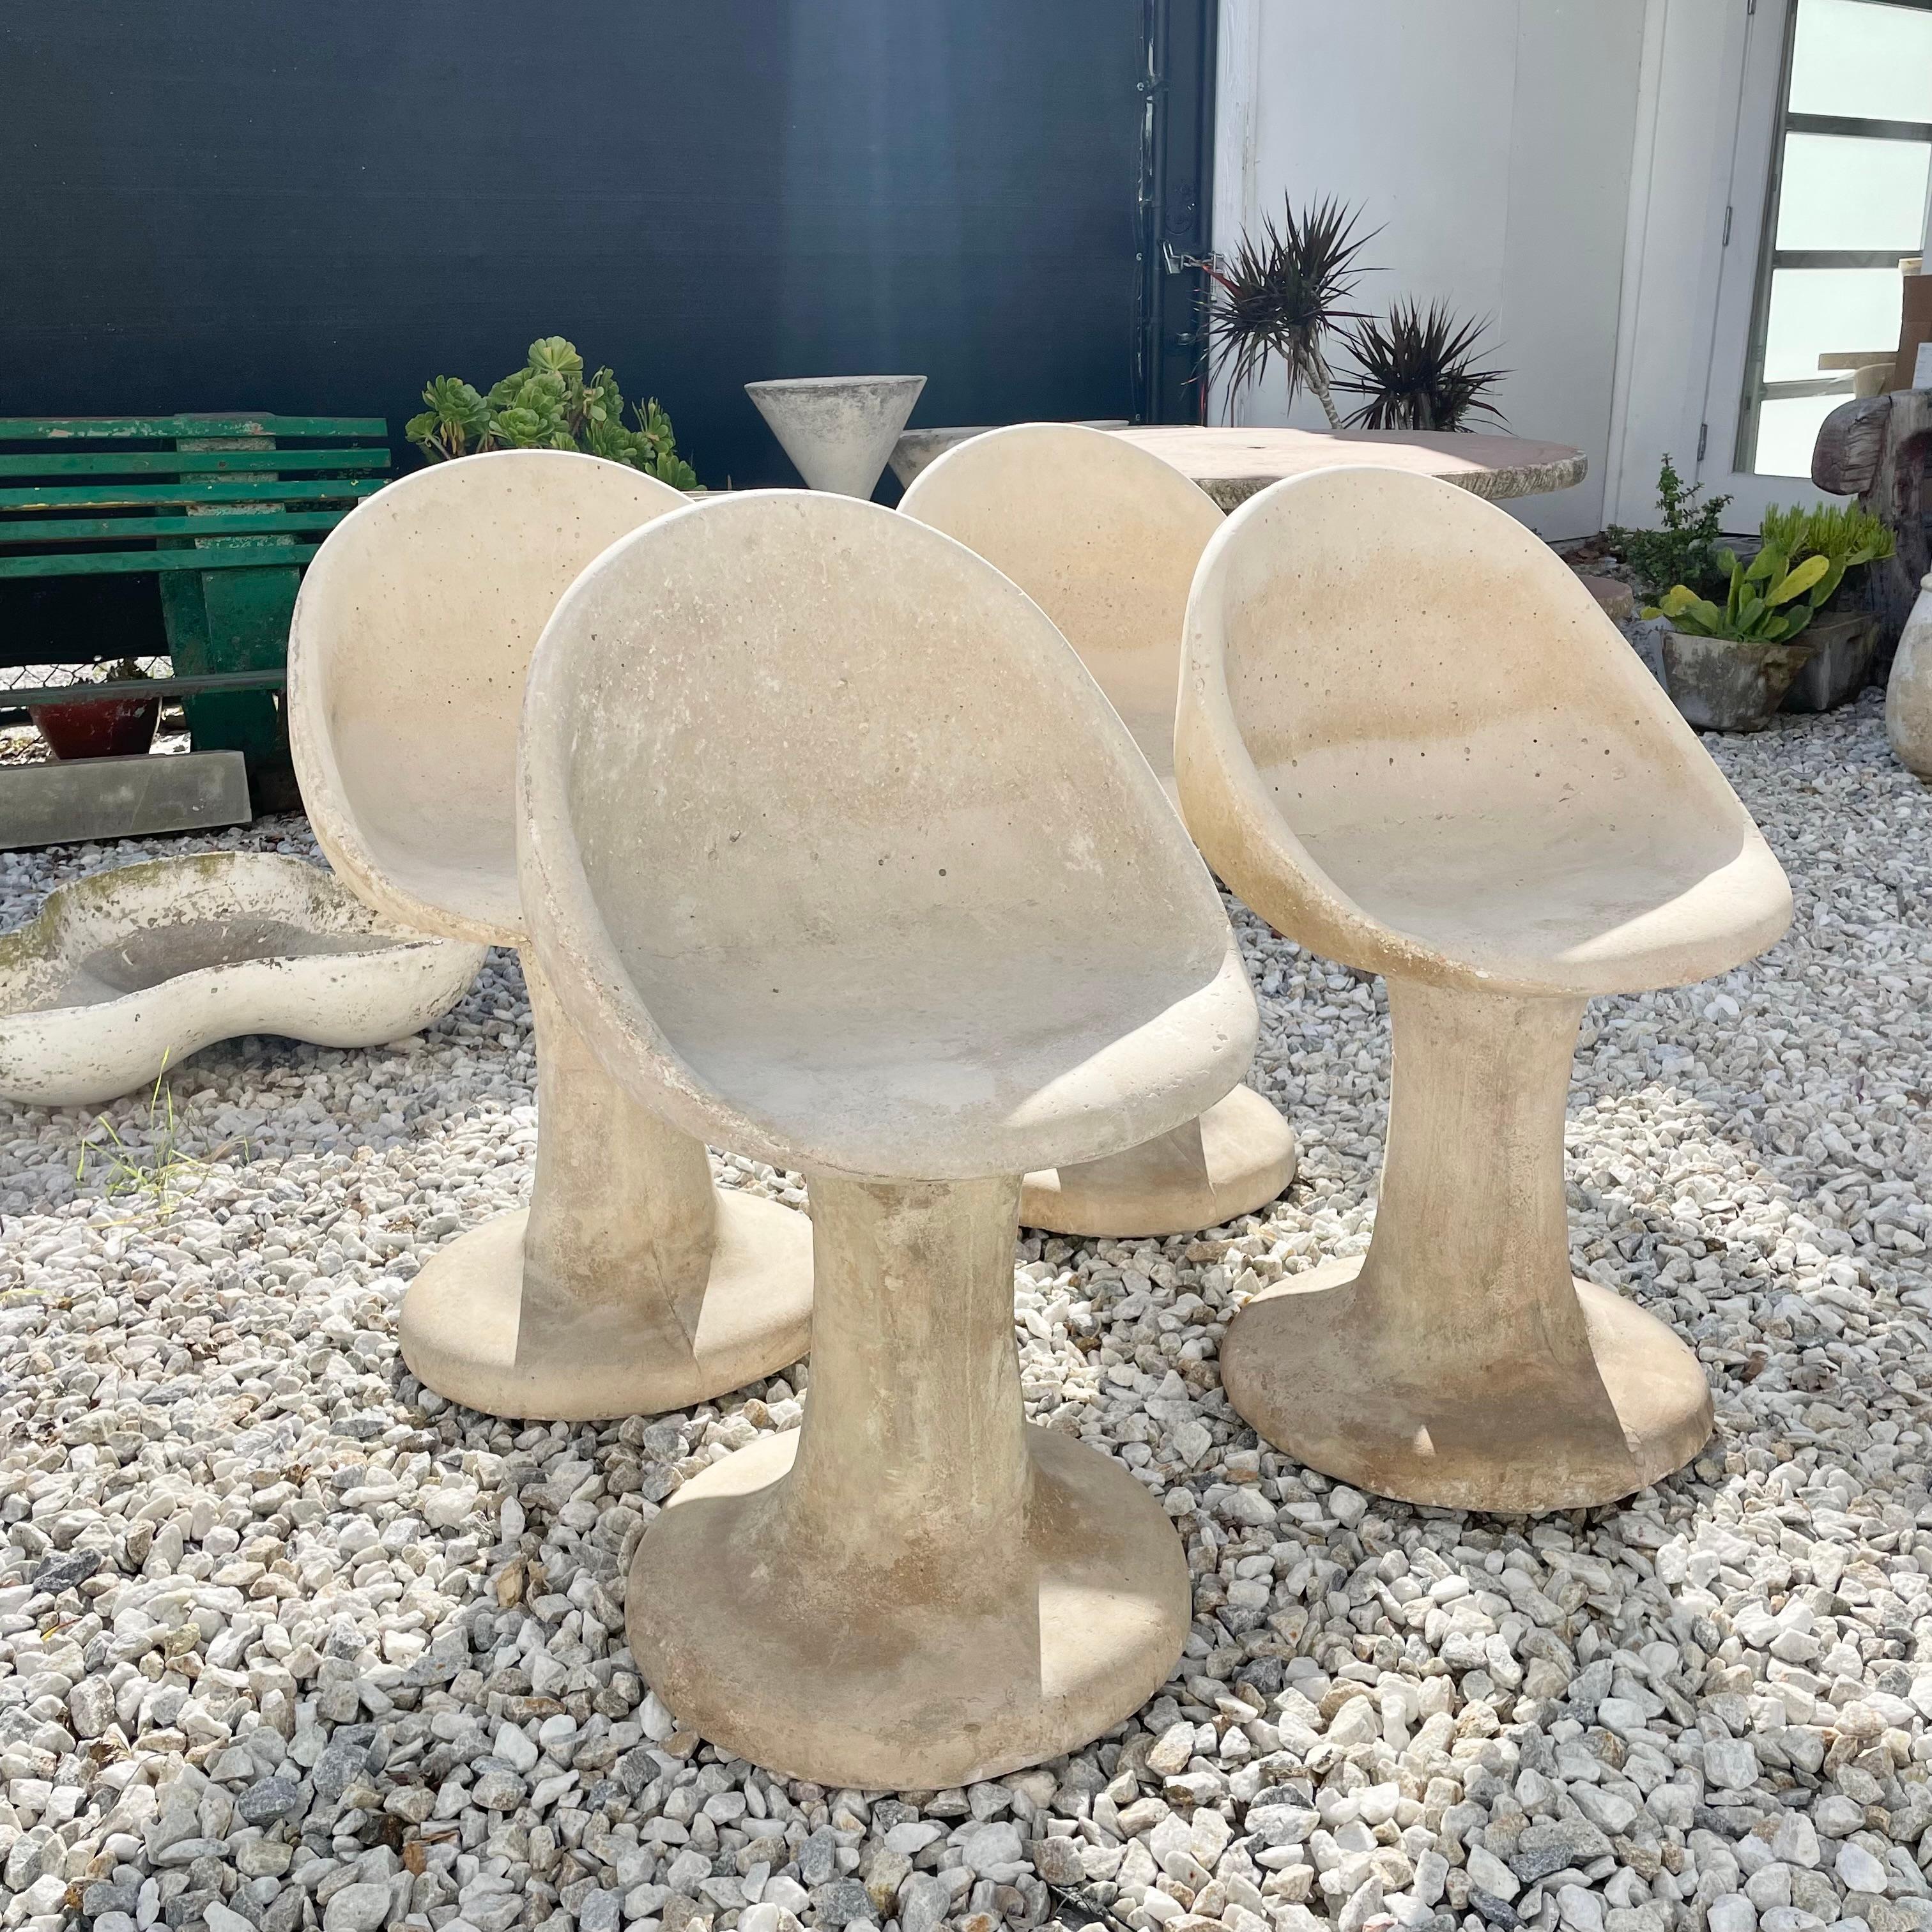 Unique set of concrete aggregate chairs with a Tulip style base. Very unusual chairs with light patina and nice coloring. Good condition. Extremely heavy and well made. Priced as a pair of 2 chairs. 2 sets (4 chairs total) available.